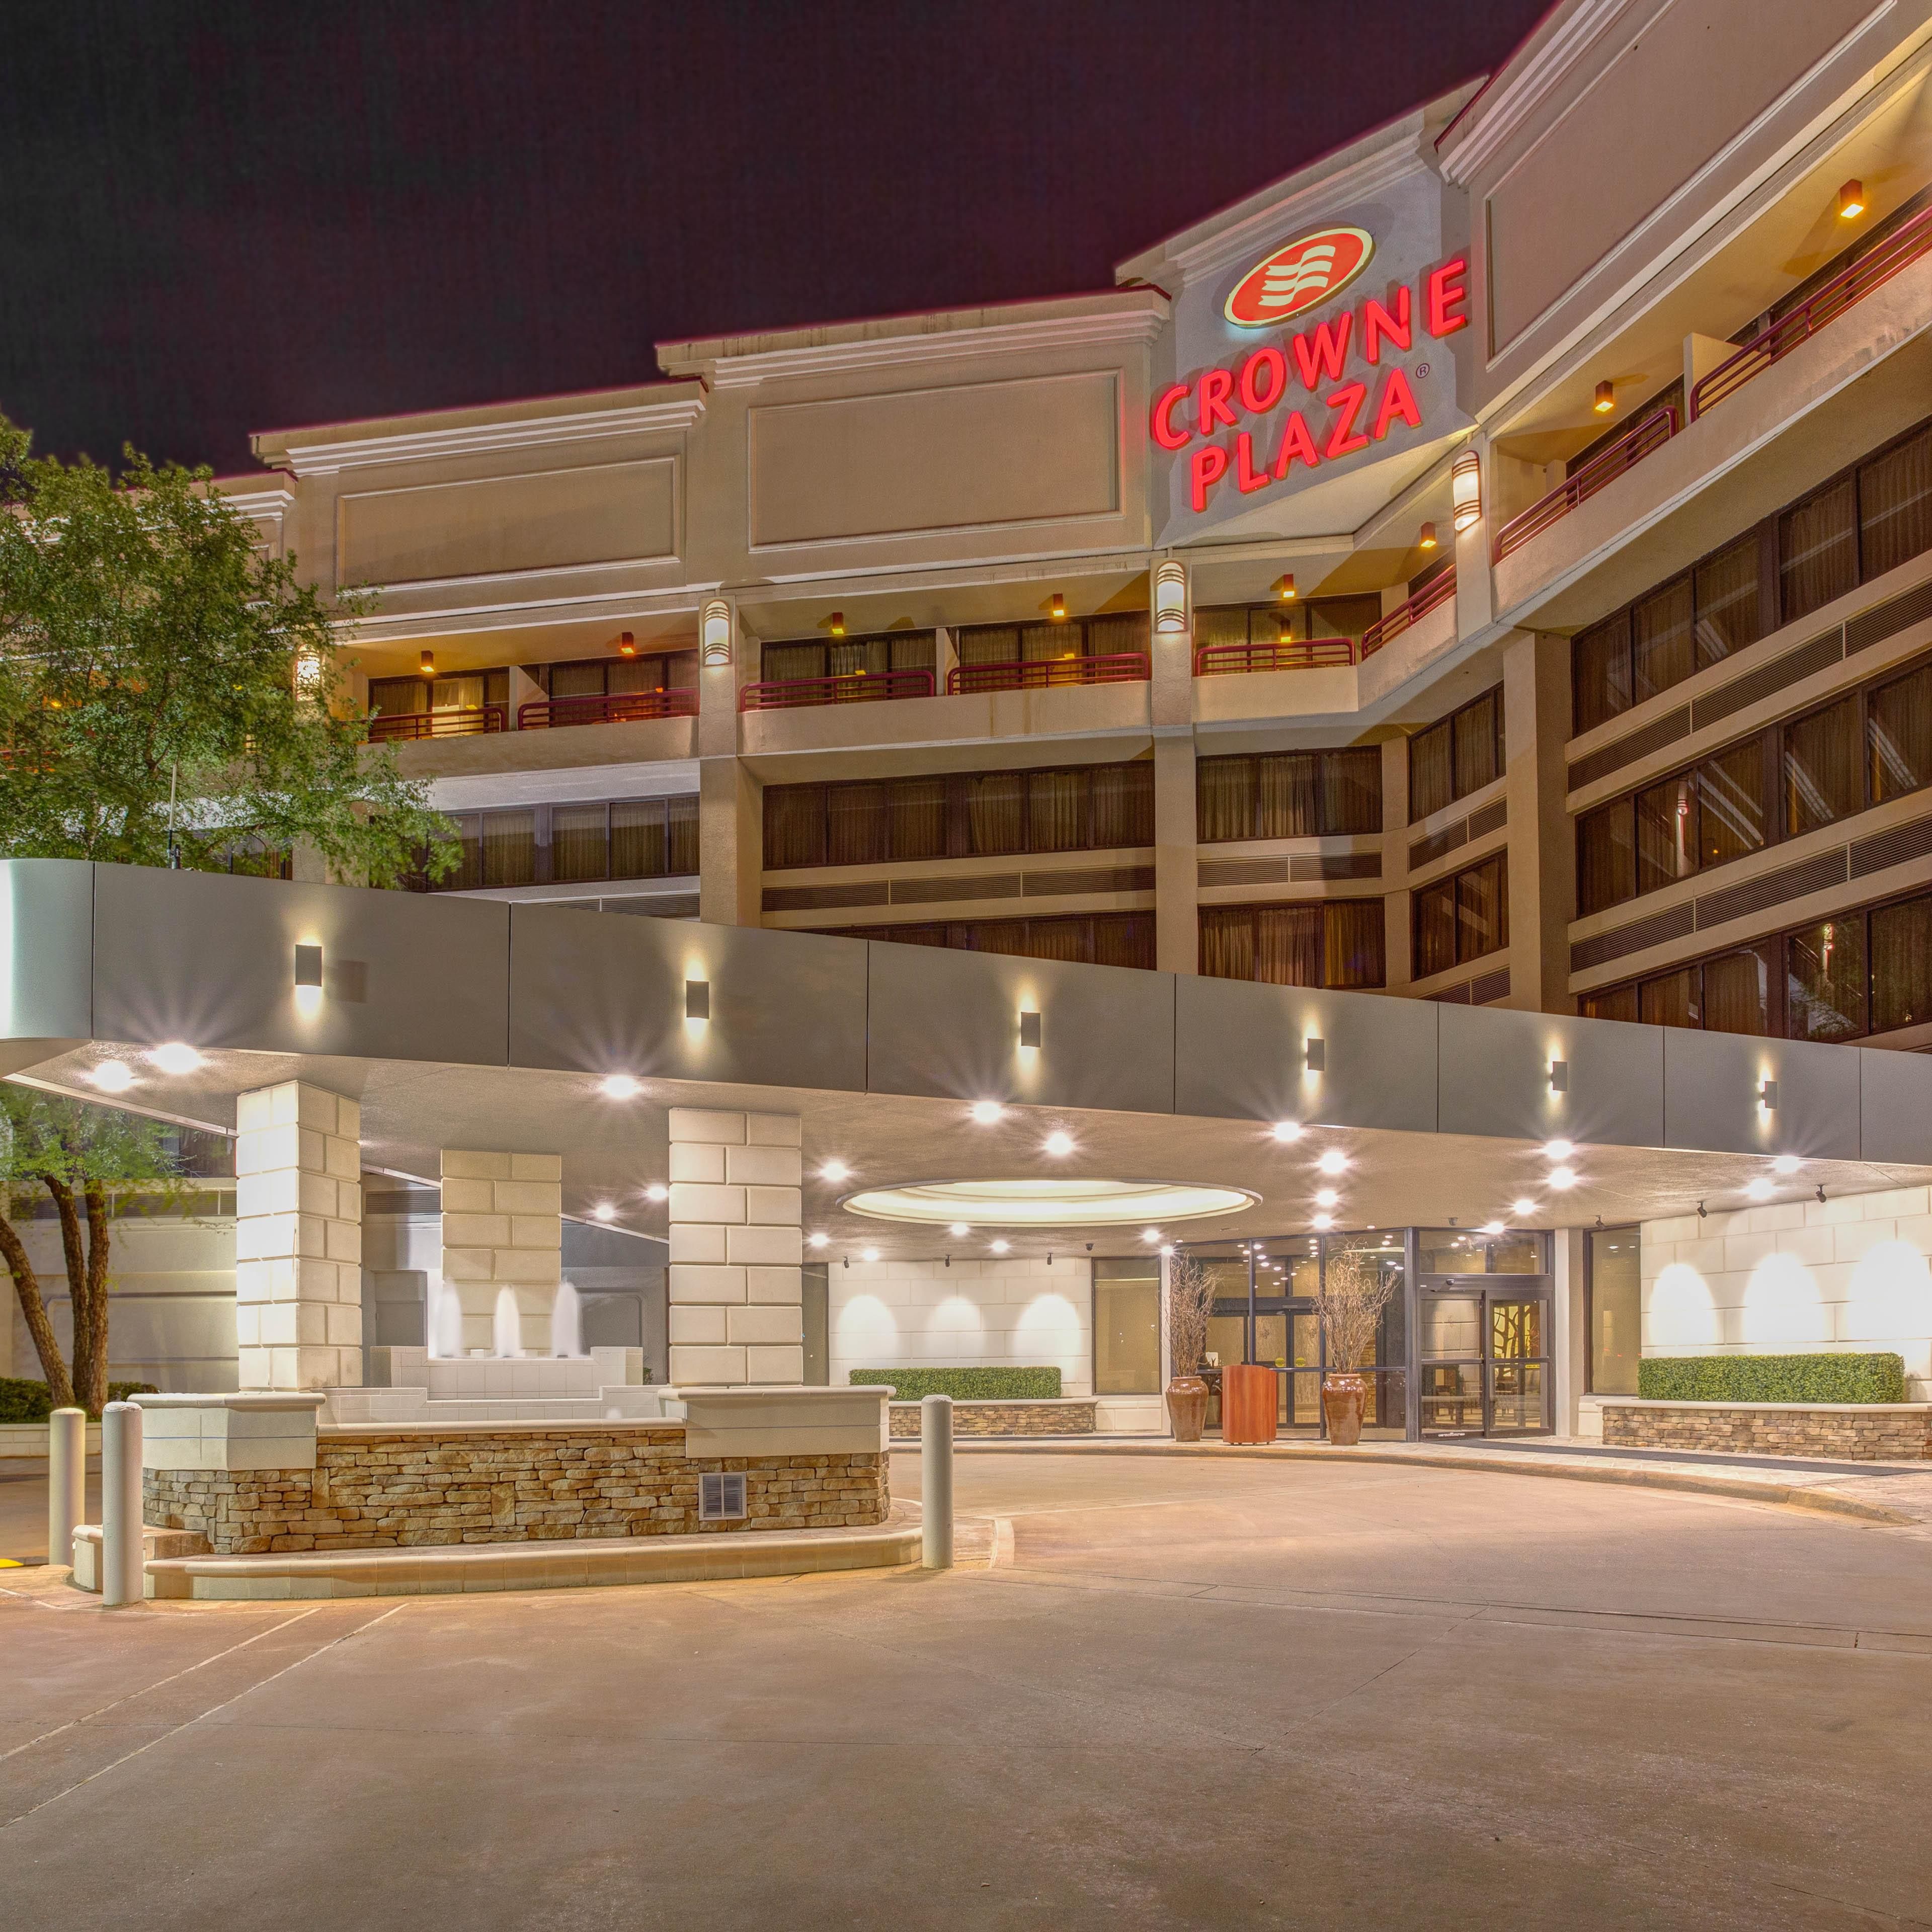 Welcome to the Crowne Plaza Baton Rouge!